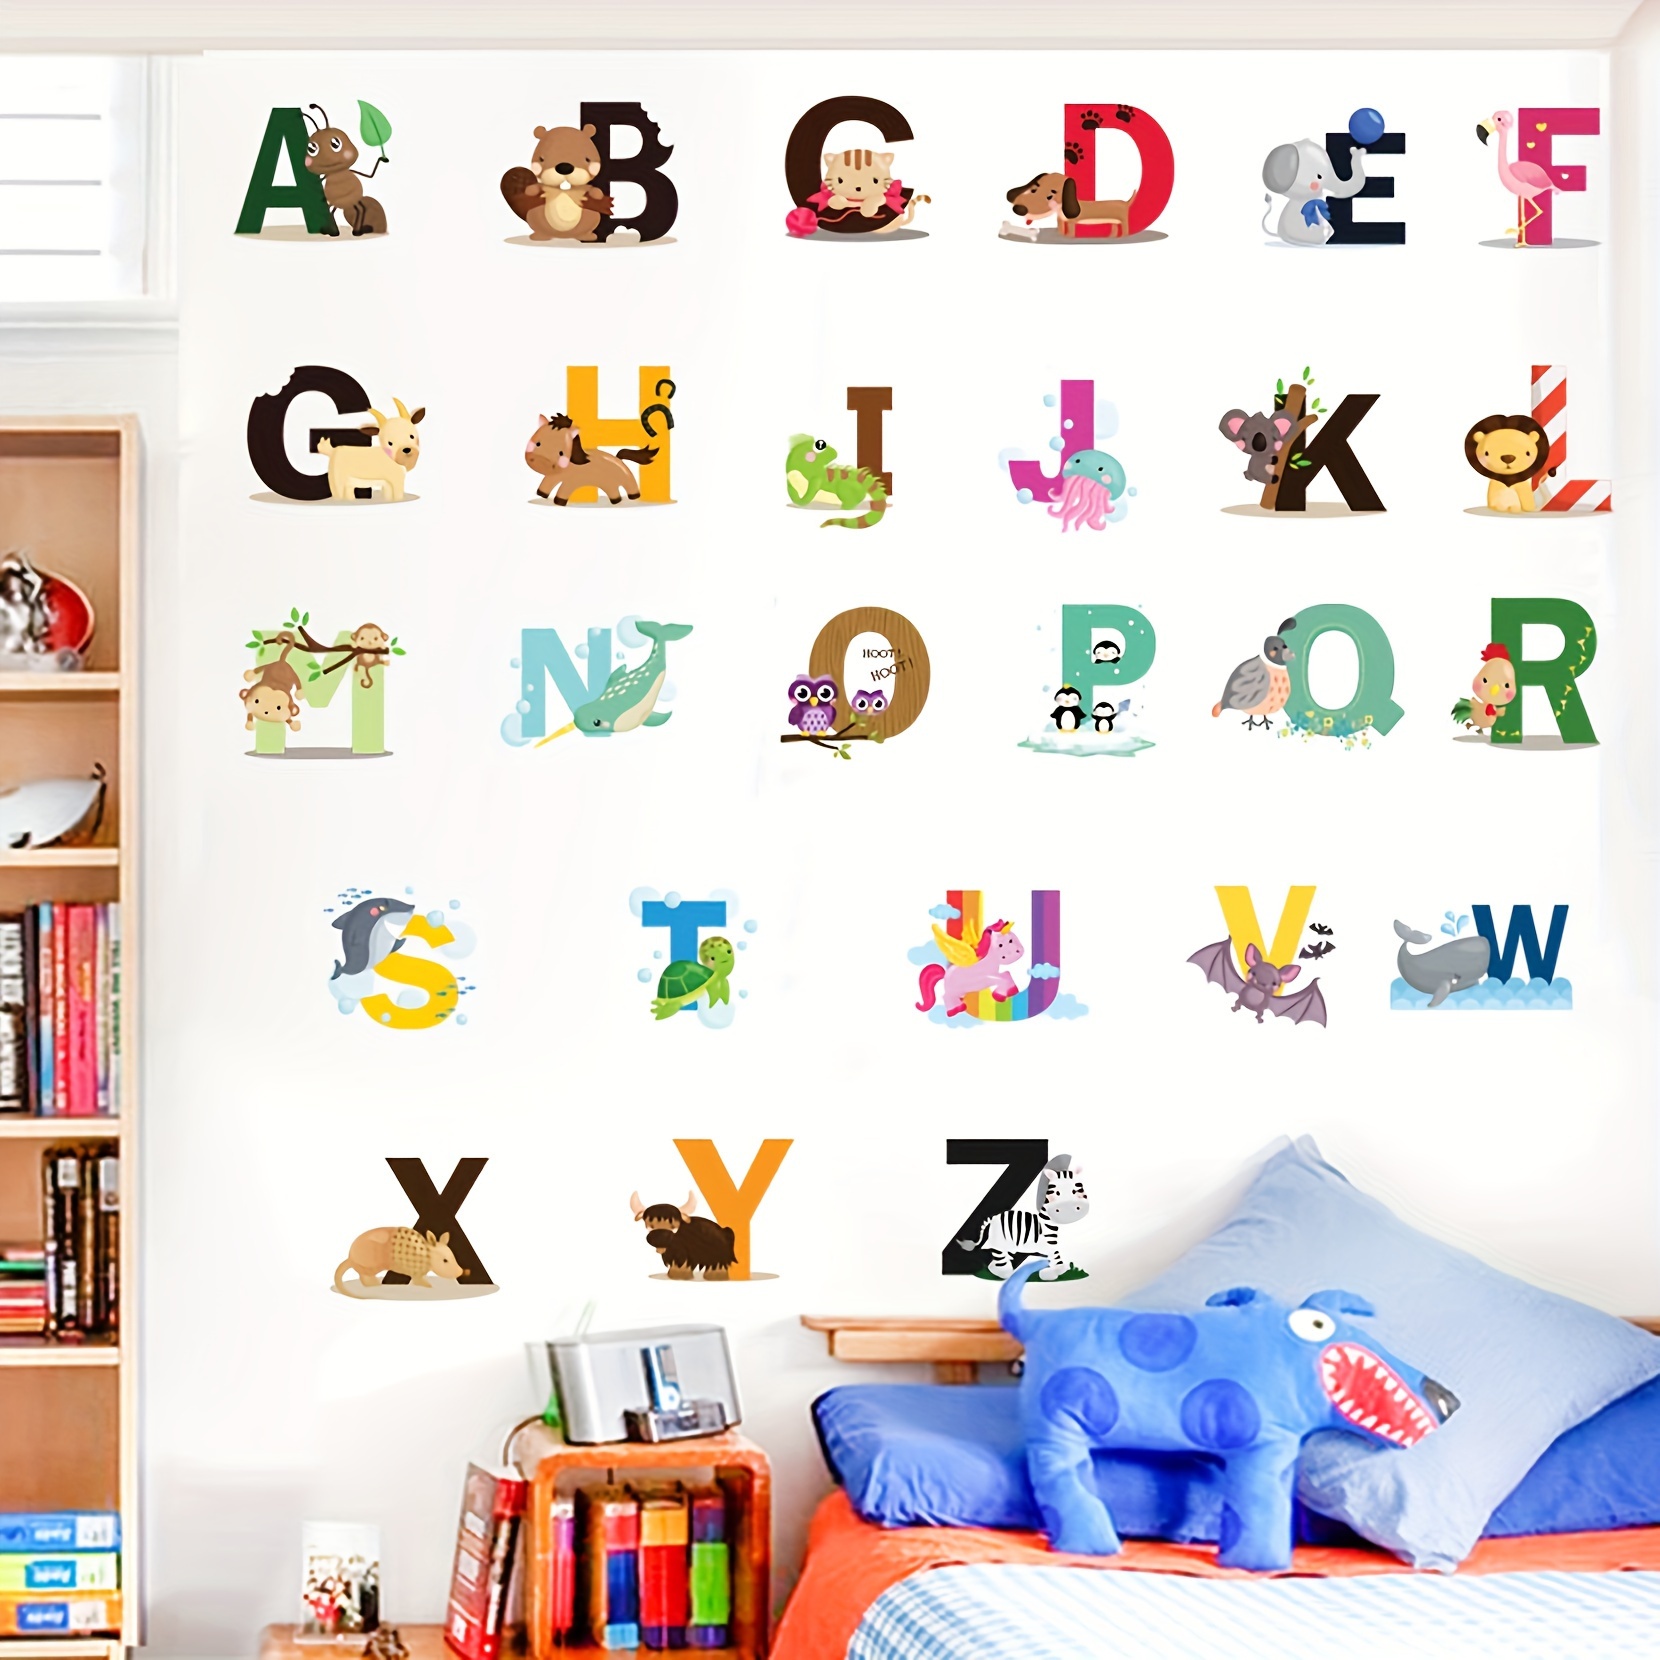 

interactive" Peel & Stick Alphabet Wall Decals - Removable Animal Abc Vinyl Stickers For Bedroom, Living Room, And Playroom Decor